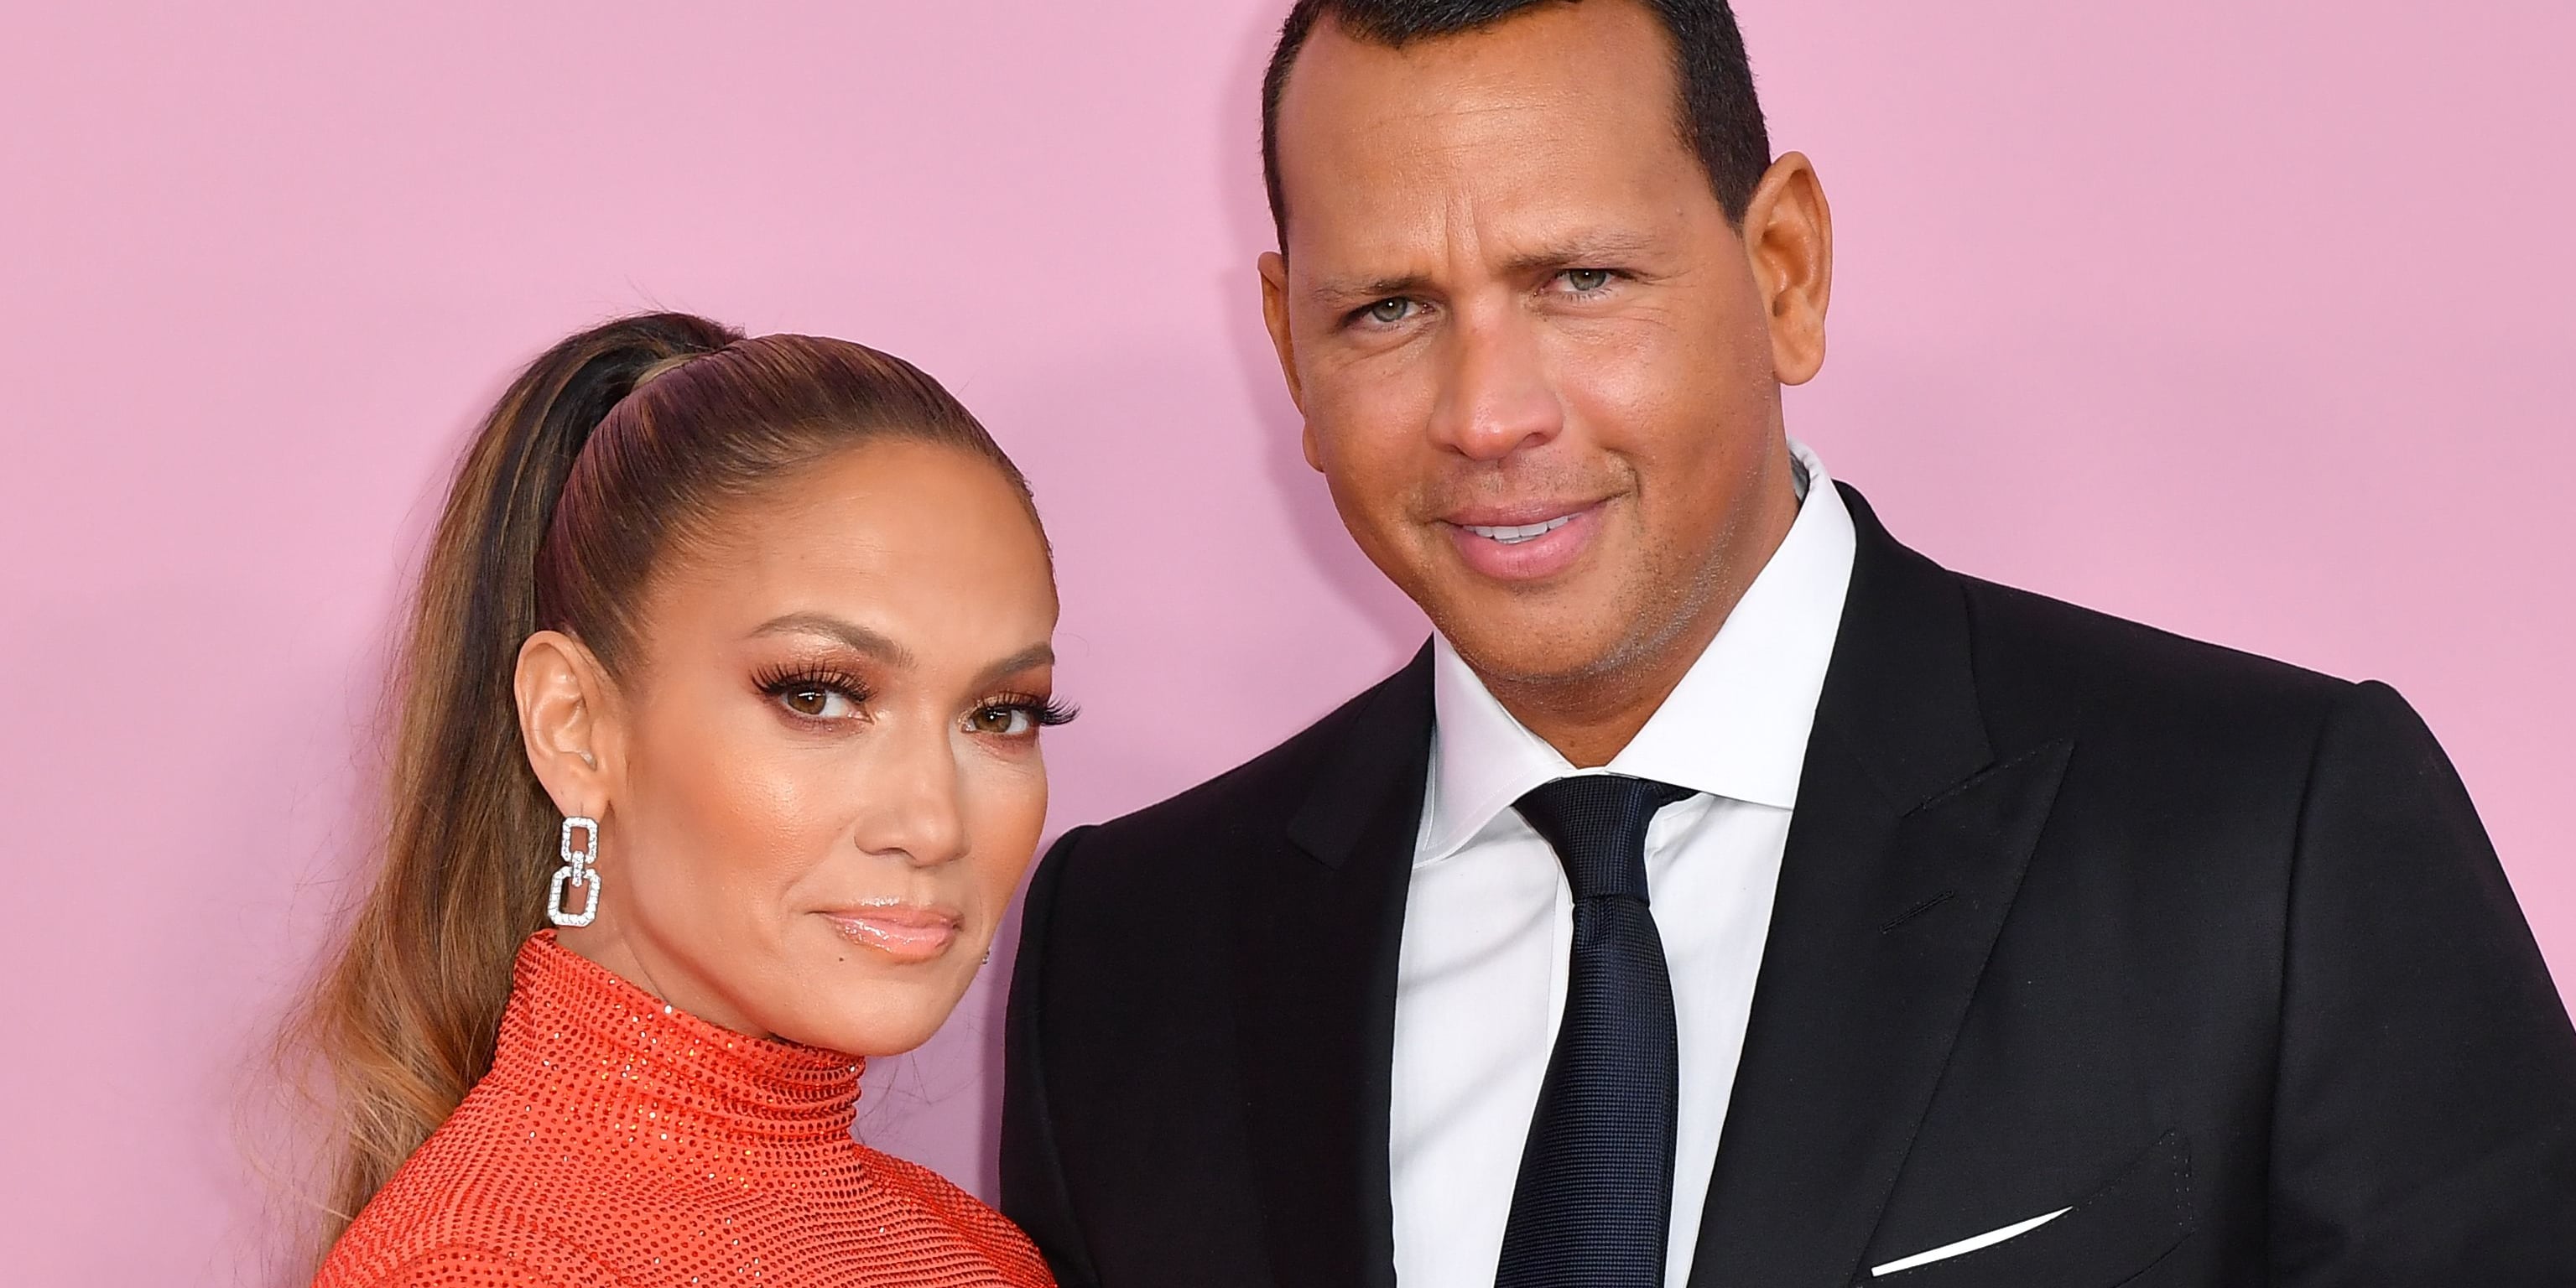 Alex Rodriguez and Kathryne Padgett's Relationship Timeline